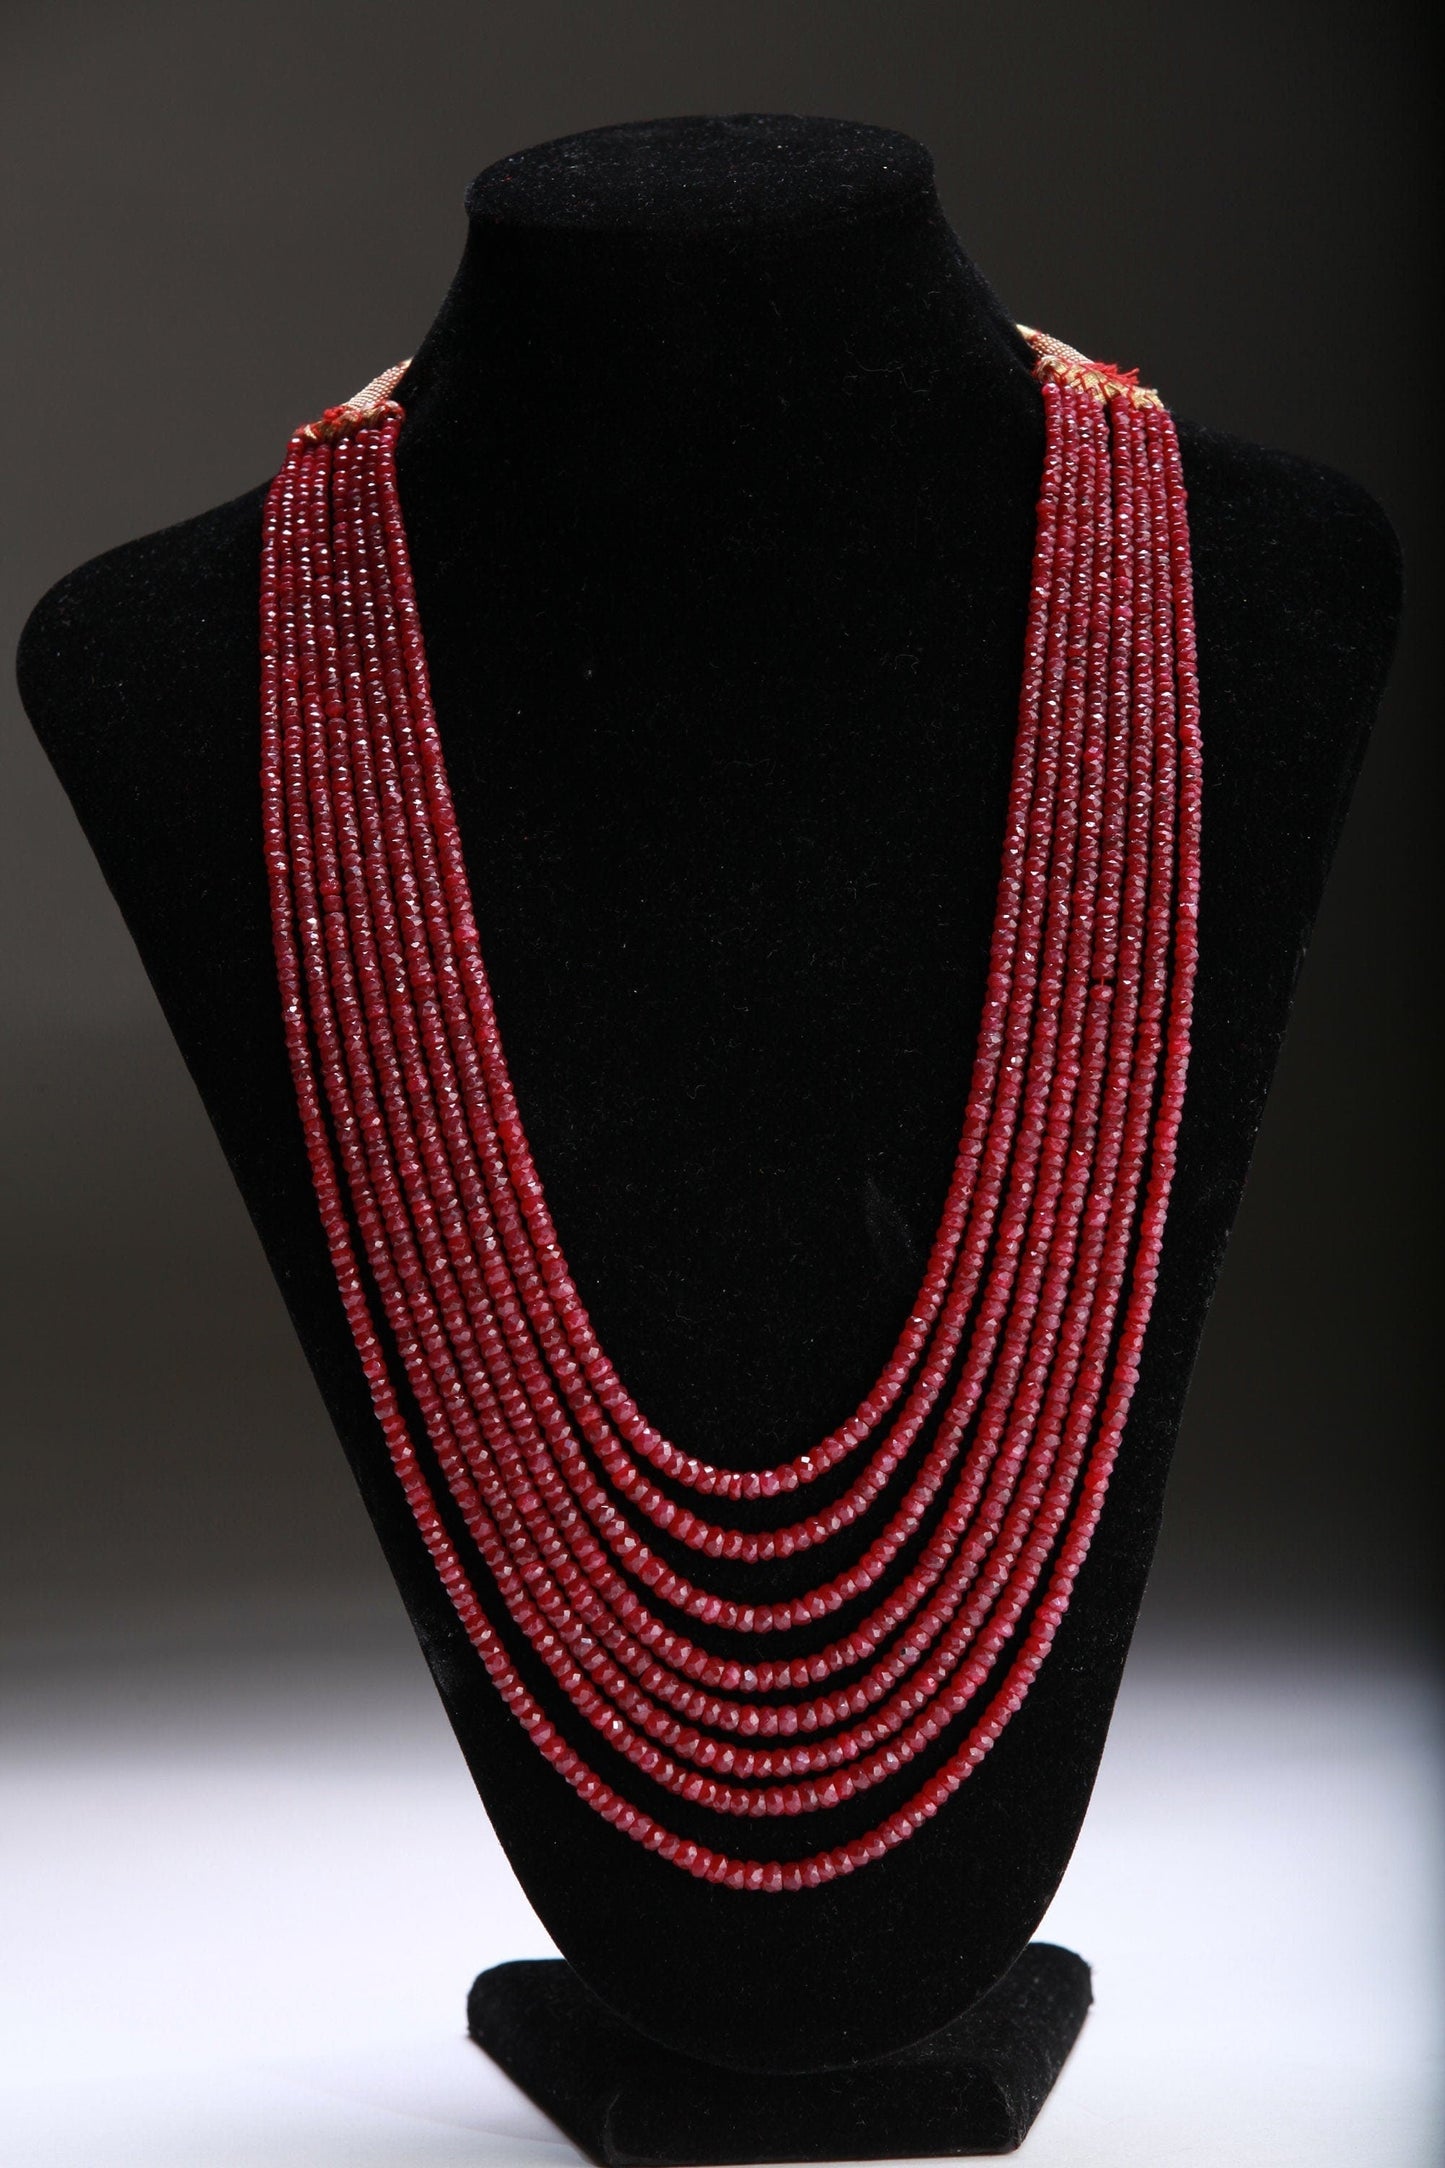 AAA Natural Ruby Gemstones 3-4mm Multi Strand, 5, 7, 8, 9, 10 Line Layer Necklace Adjustable thread to 24&quot; Long, Precious Gift for her.